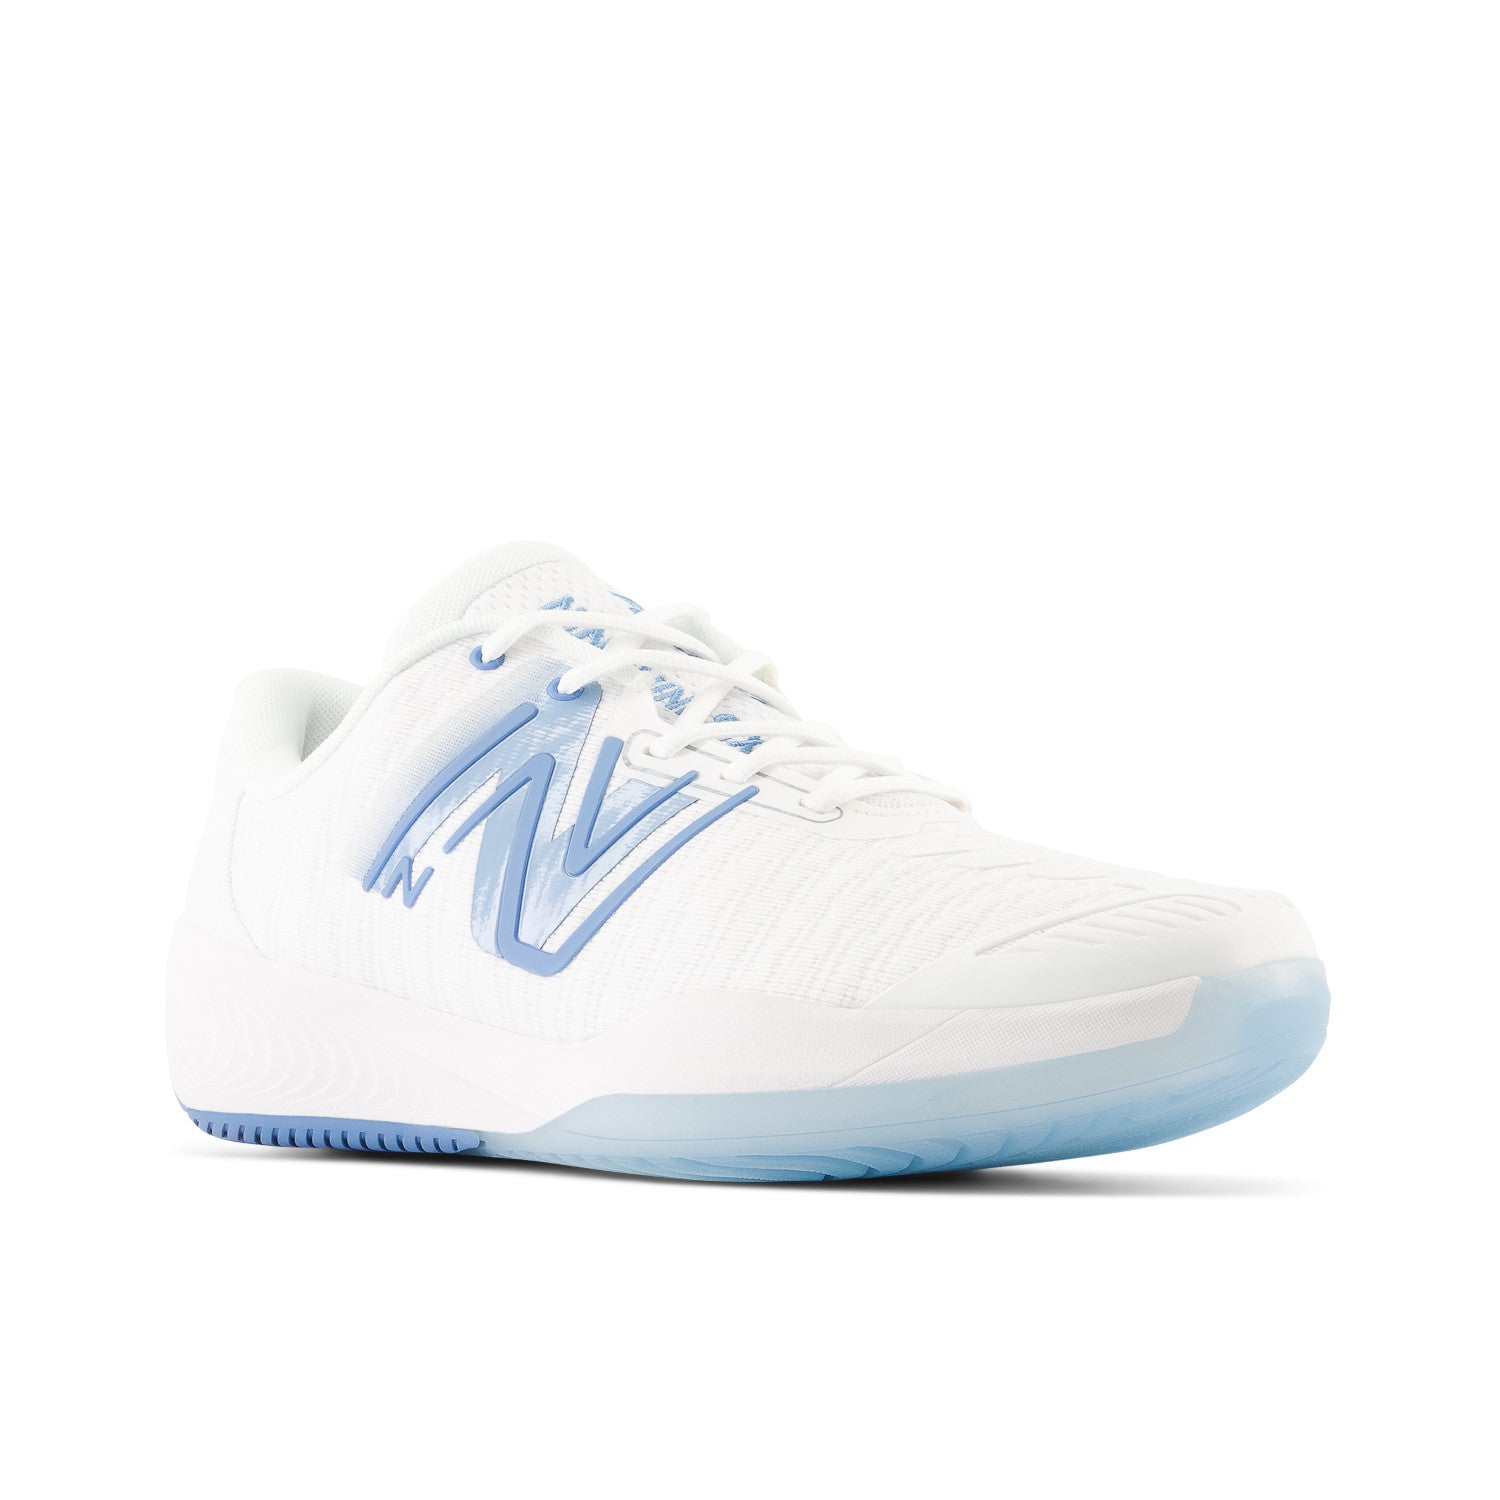 New Balance Fuel Cell 996v5 WCH996N5 Women's1